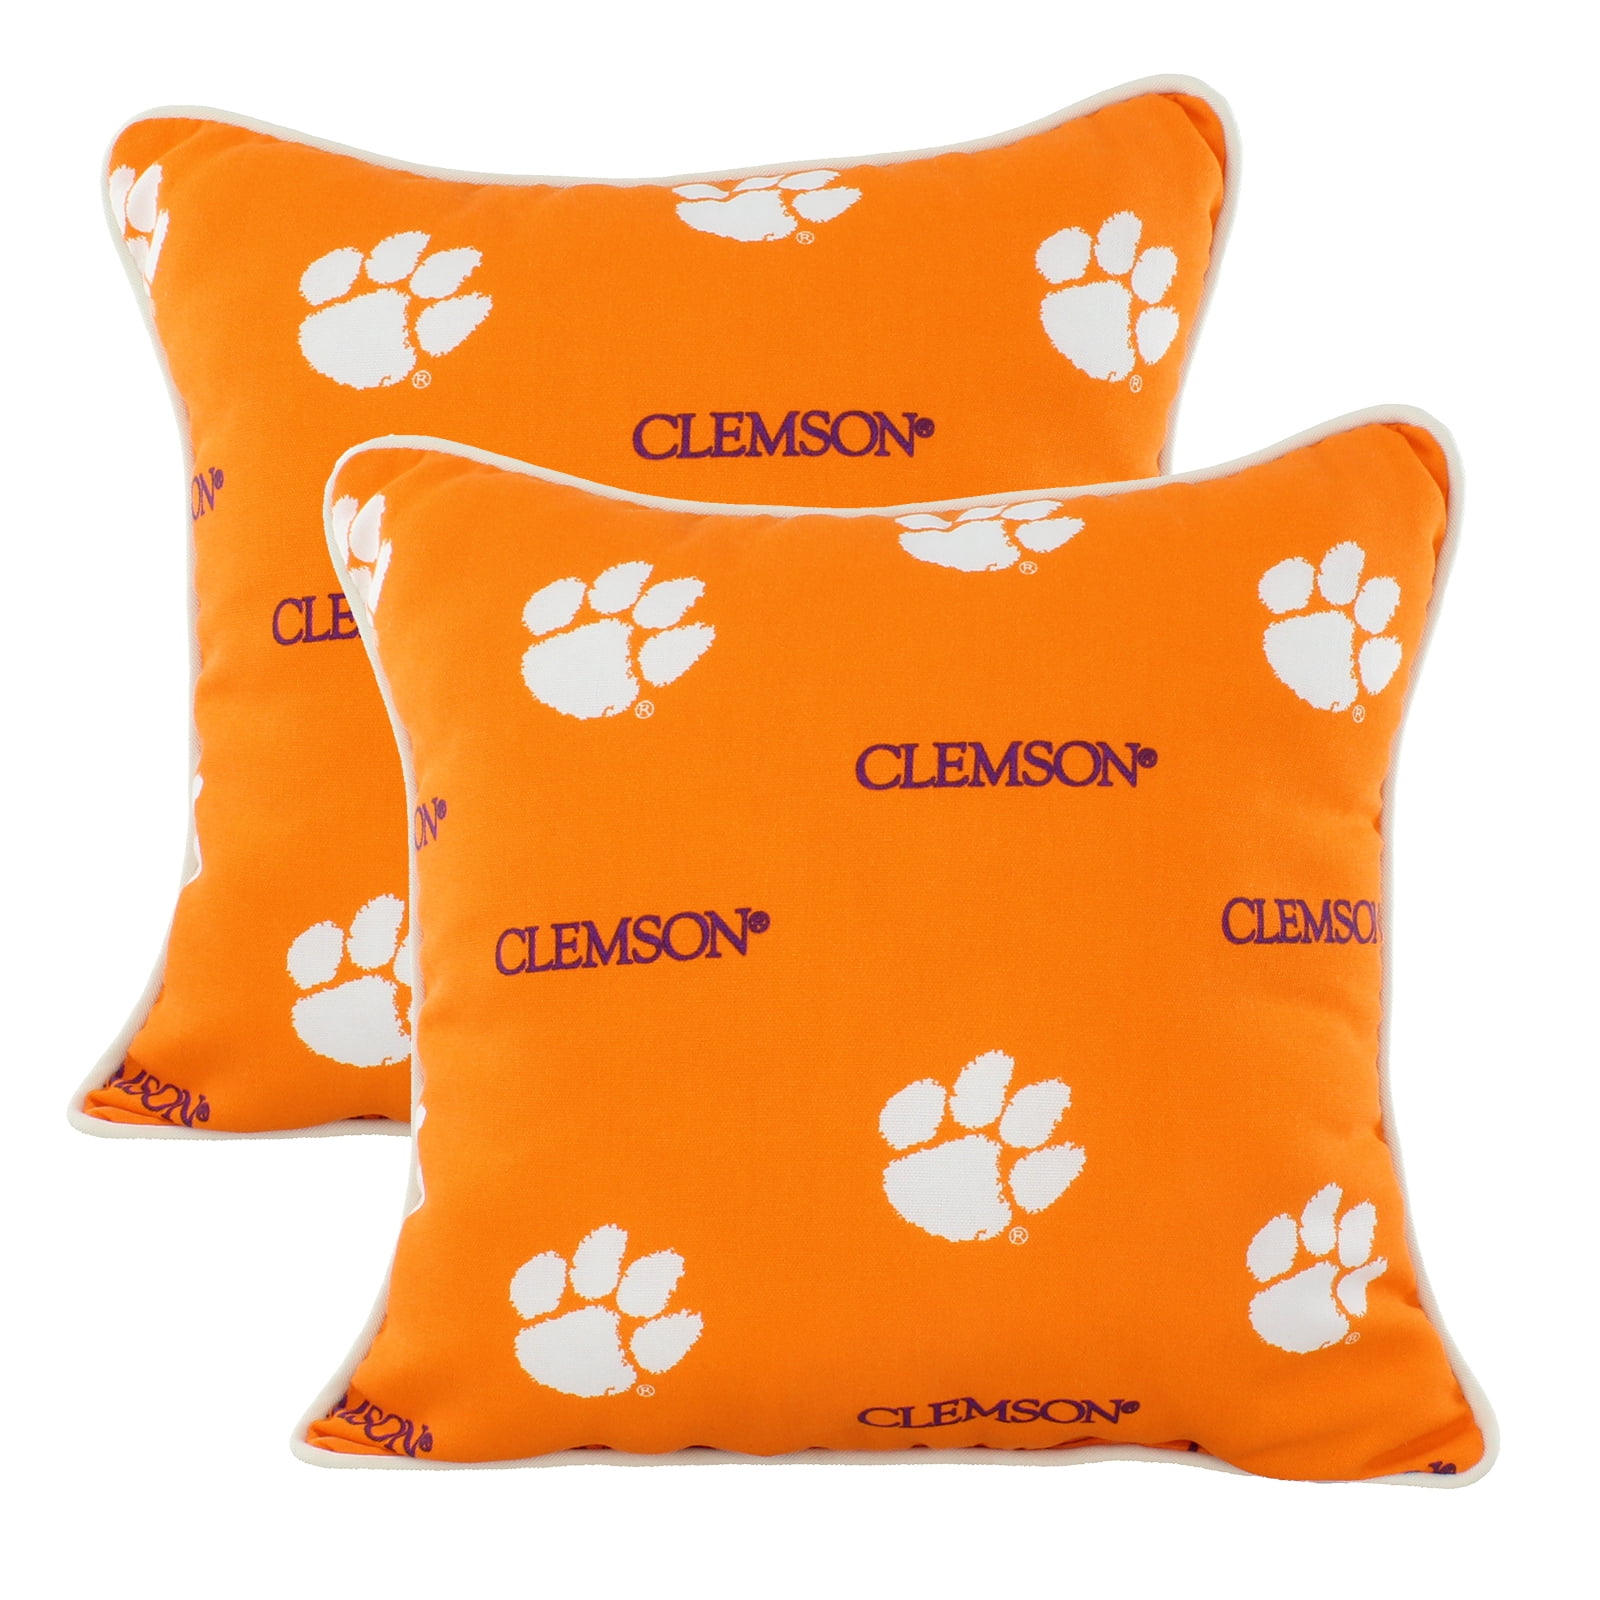 Includes 2 Decorative Pillows College Covers Tennessee Volunteers 16 x 16 Decorative Pillow